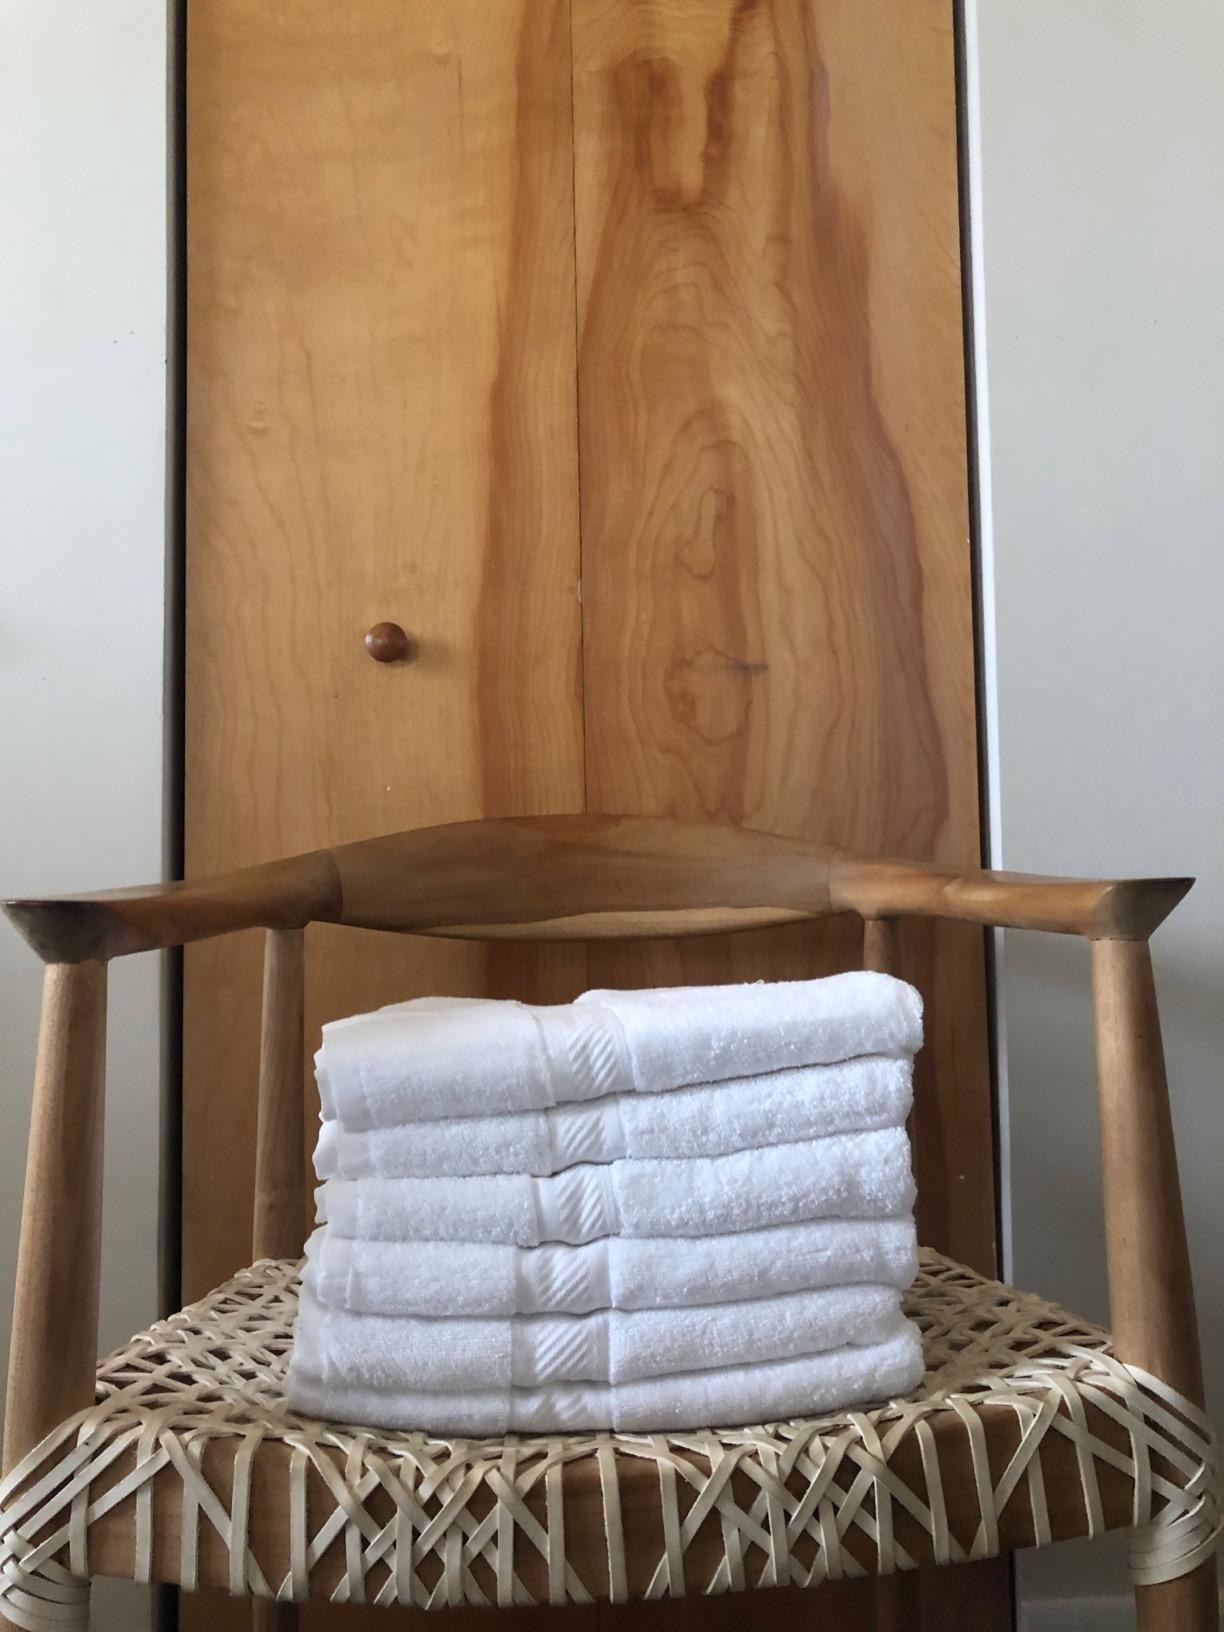 The towels in a stack on a chair